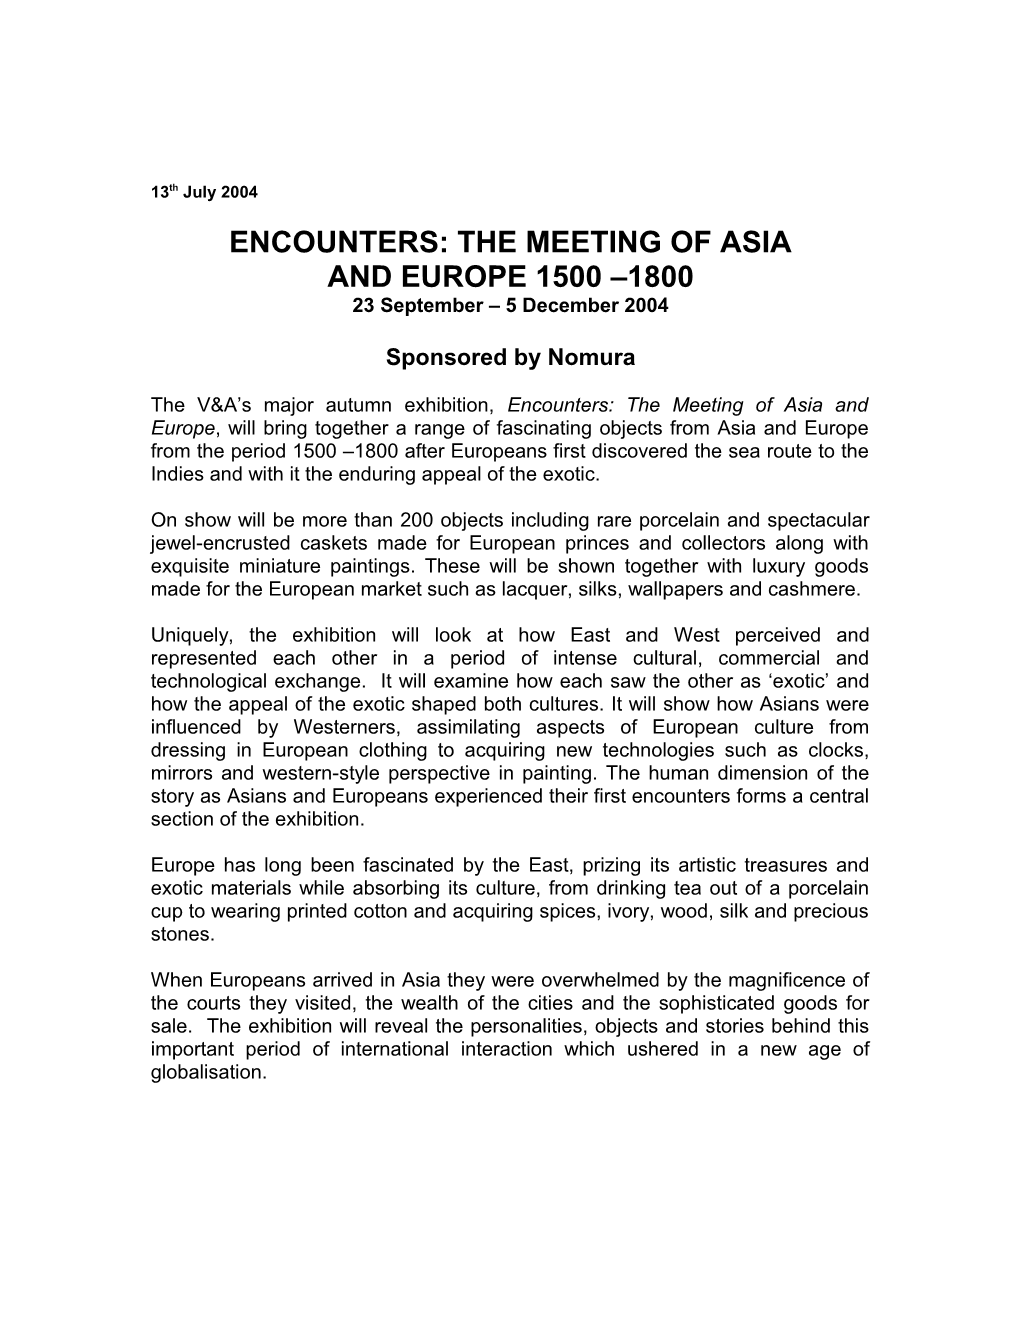 Encounters: the Meeting of Asia